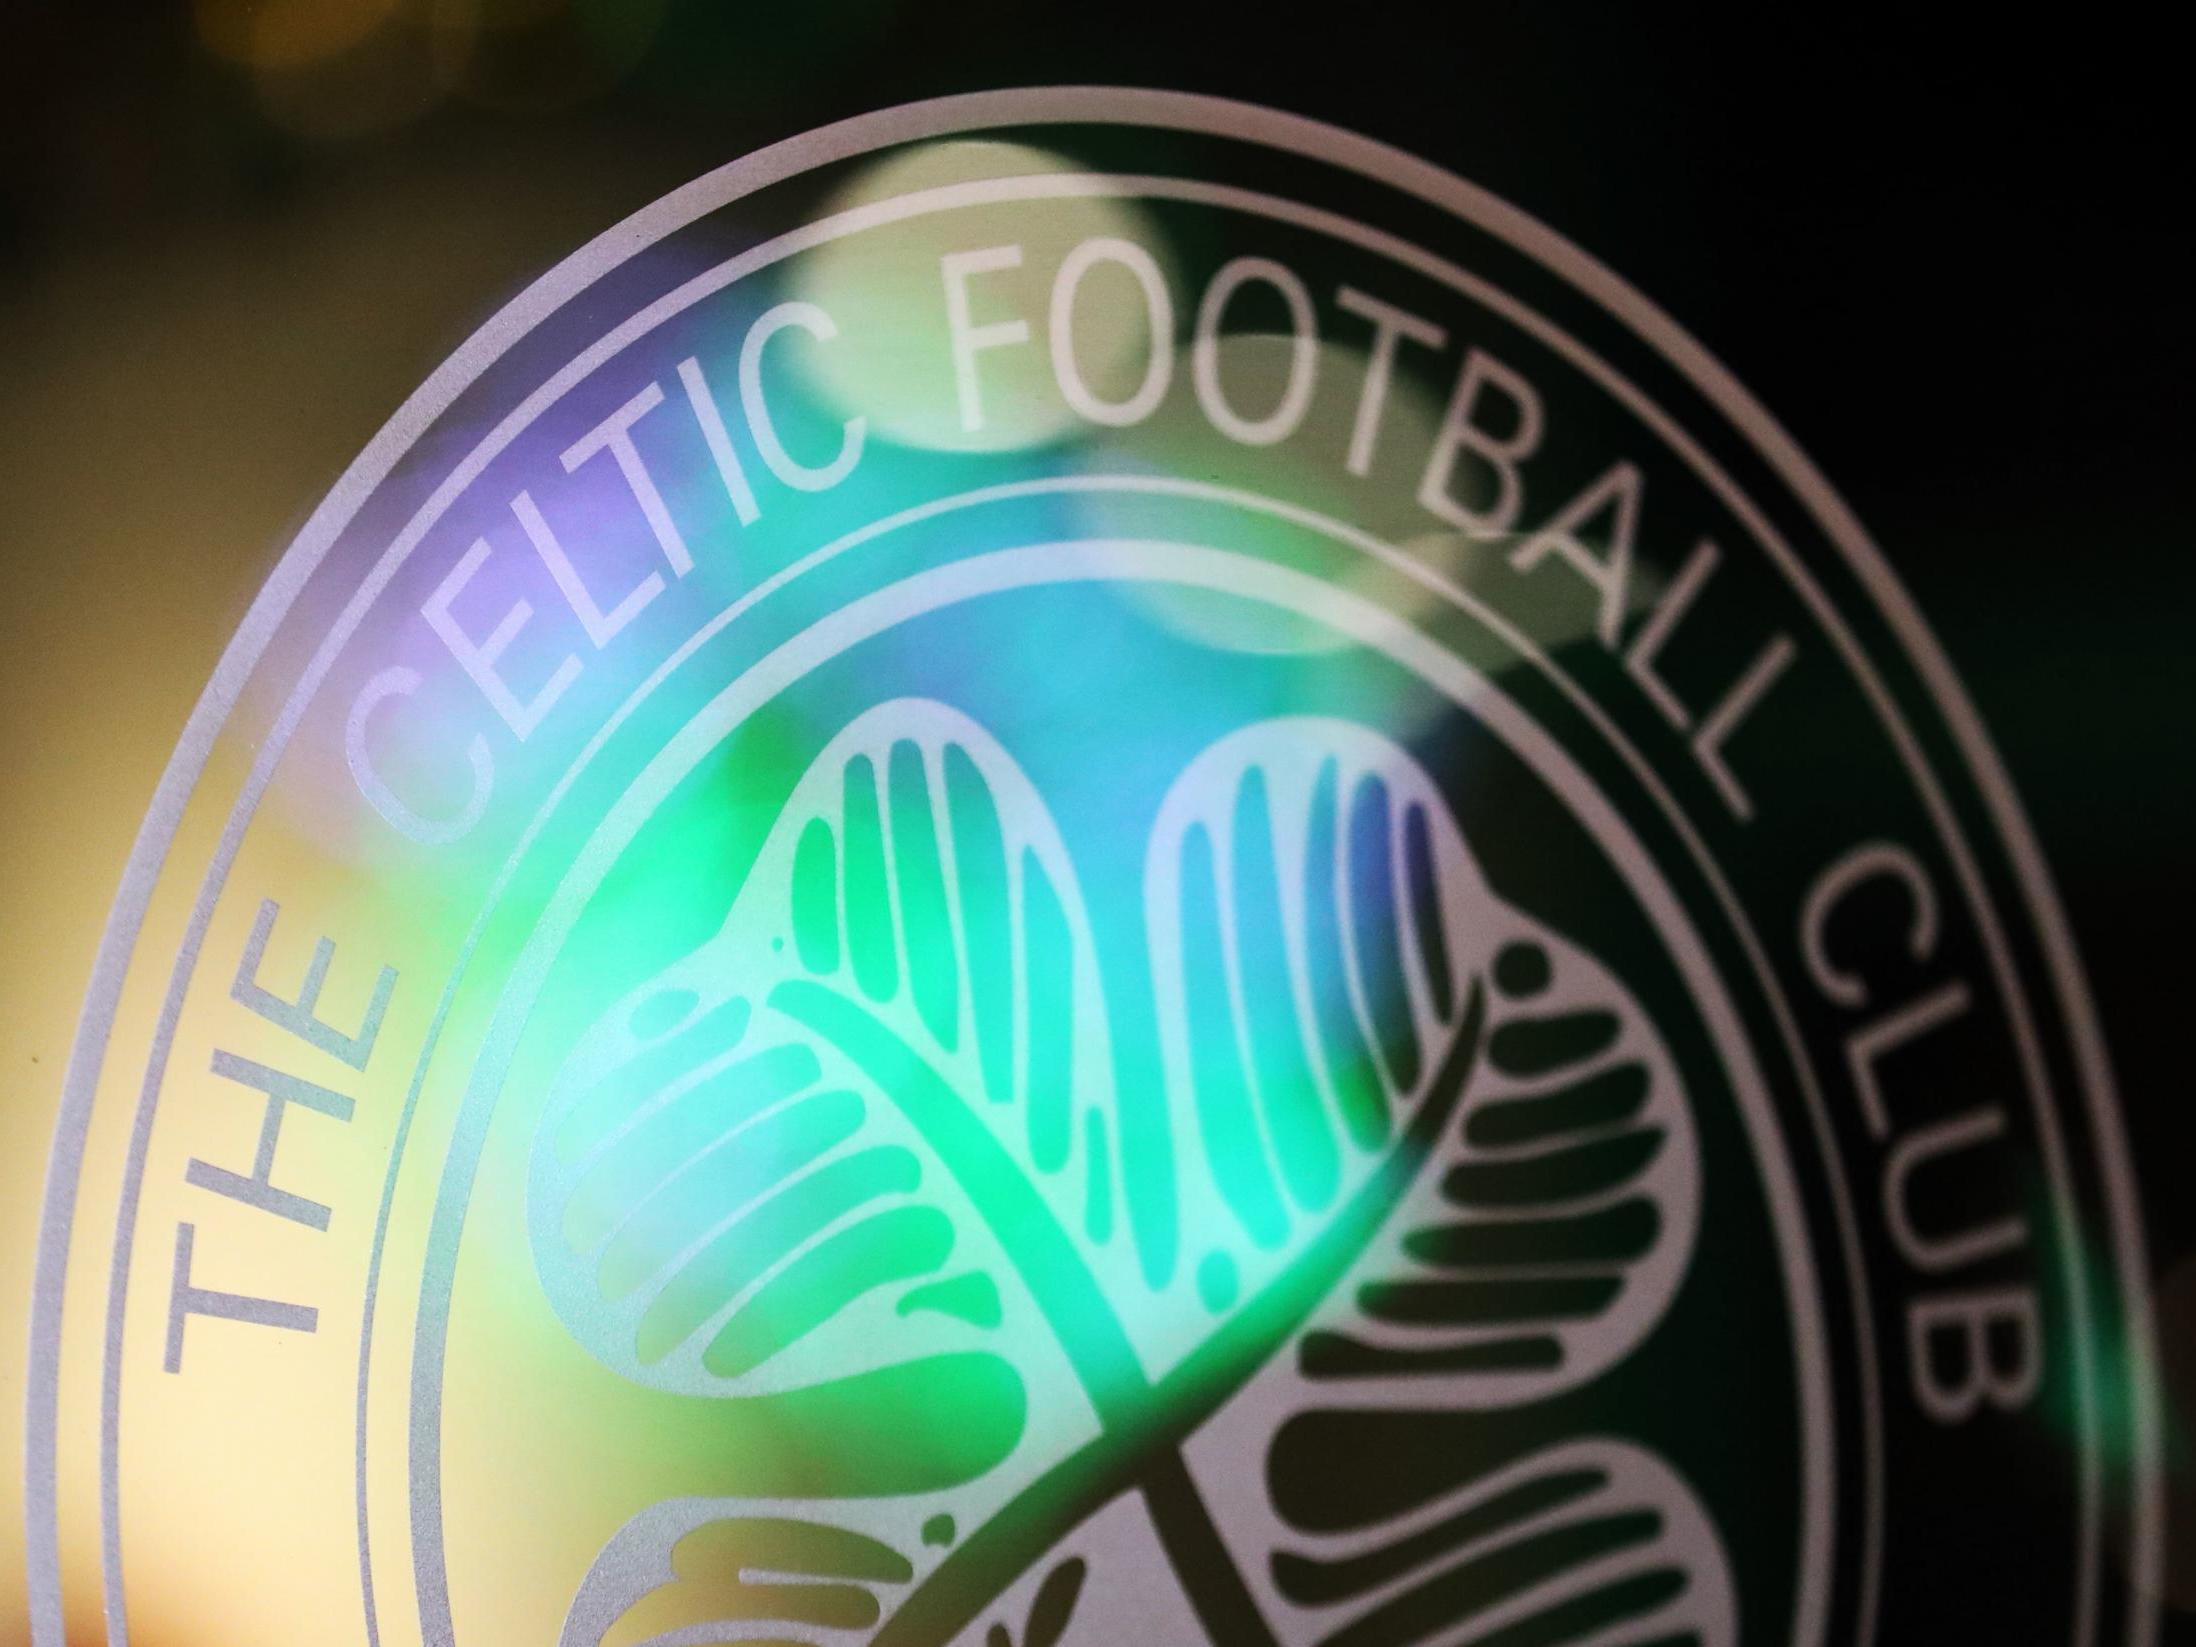 Celtic have launched an internal investigation